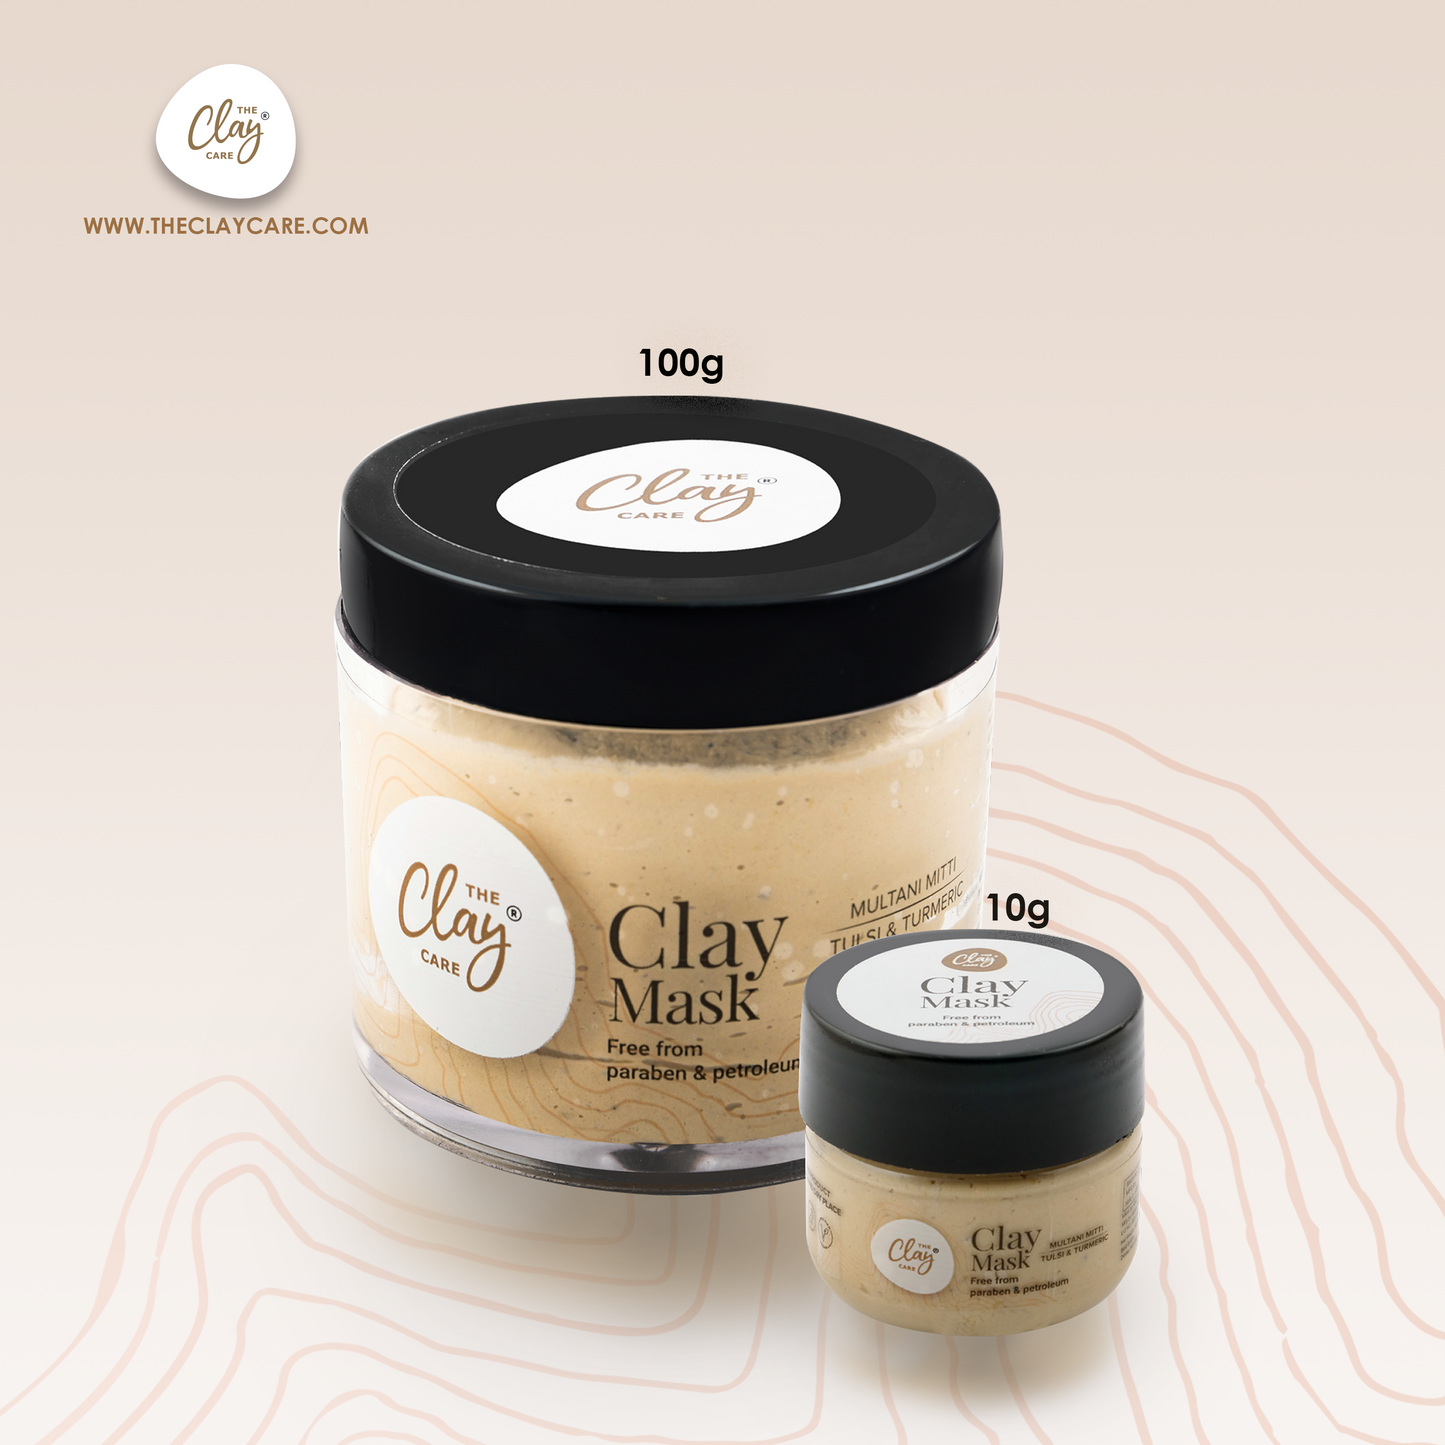 Clay Care Multani Mitti Face Pack Mask for Glowing Skin, Tan Removal & Sun Damage Protection with Turmeric & Tulsi- Paraben and Petroleum Free - 10 g